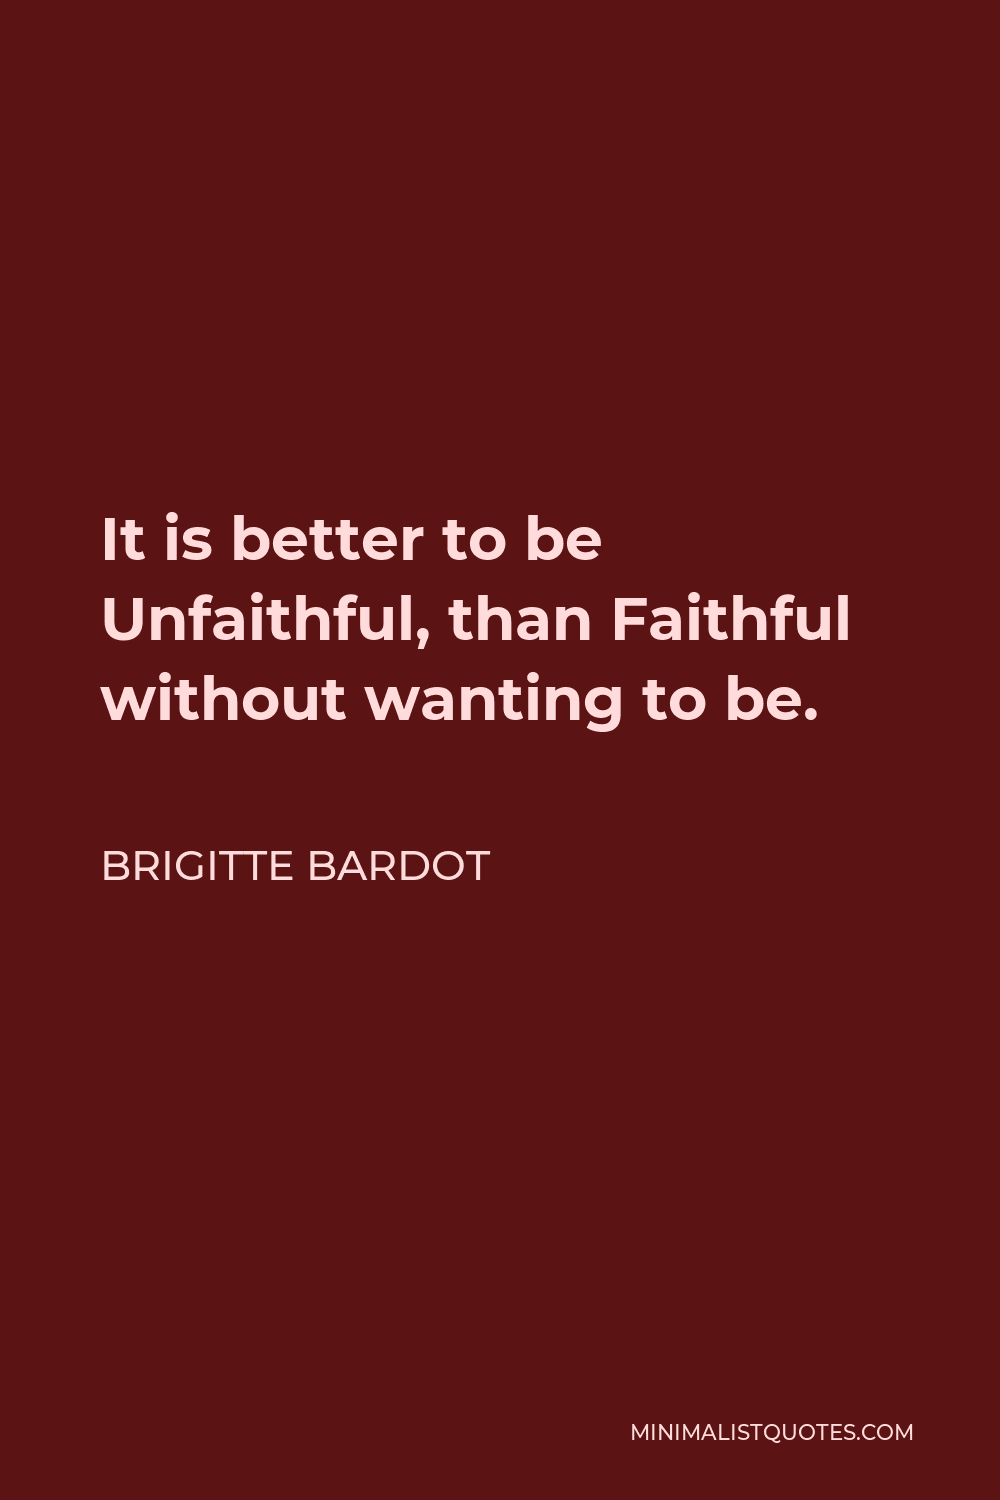 Brigitte Bardot Quote - It is better to be Unfaithful, than Faithful without wanting to be.